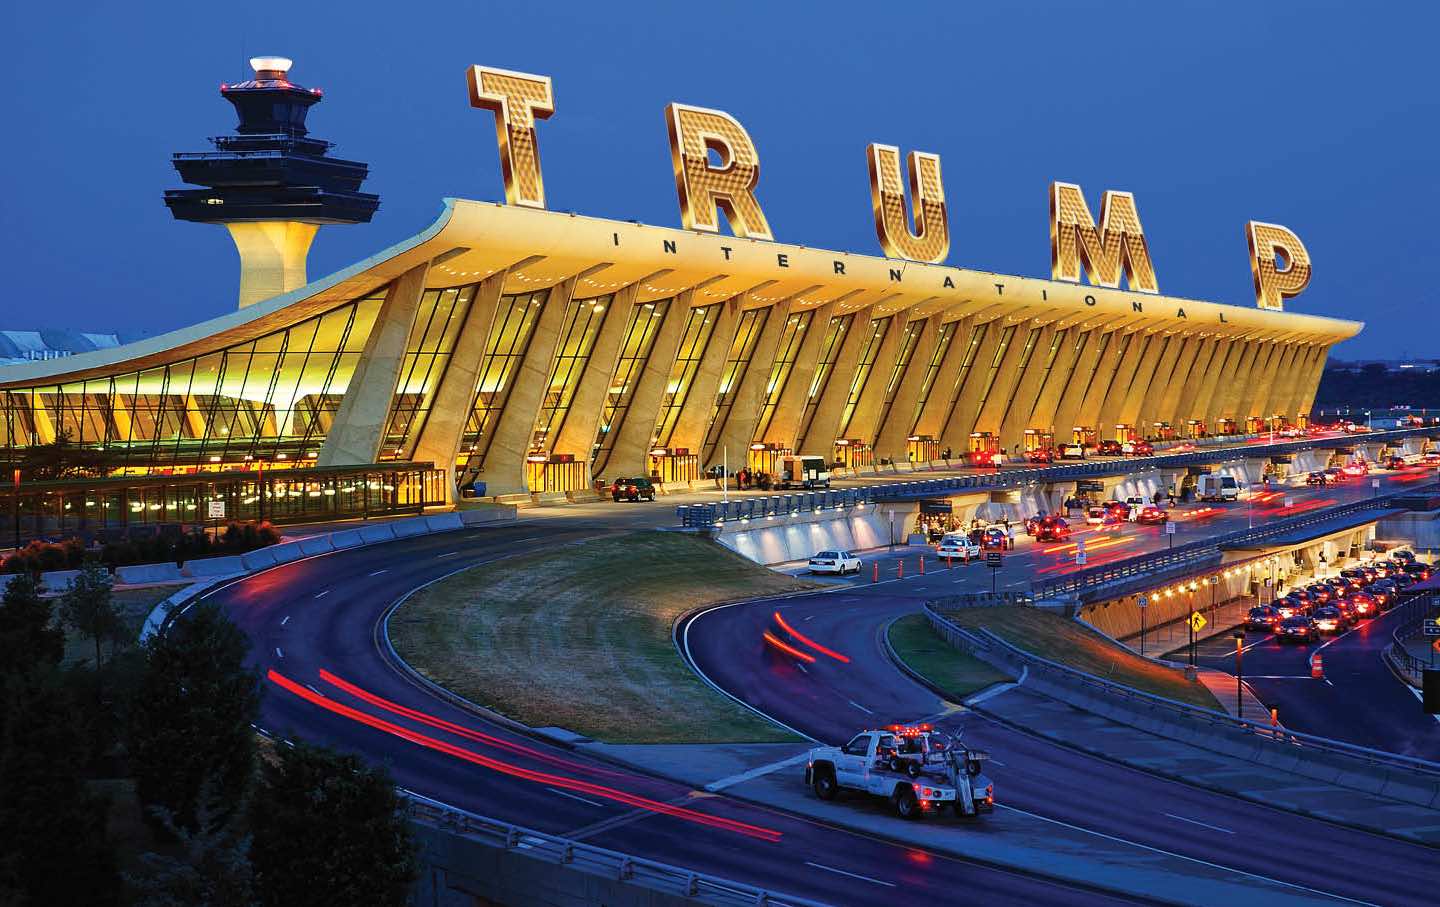 The Next Item on the Republican Agenda Is Naming an Airport After Trump